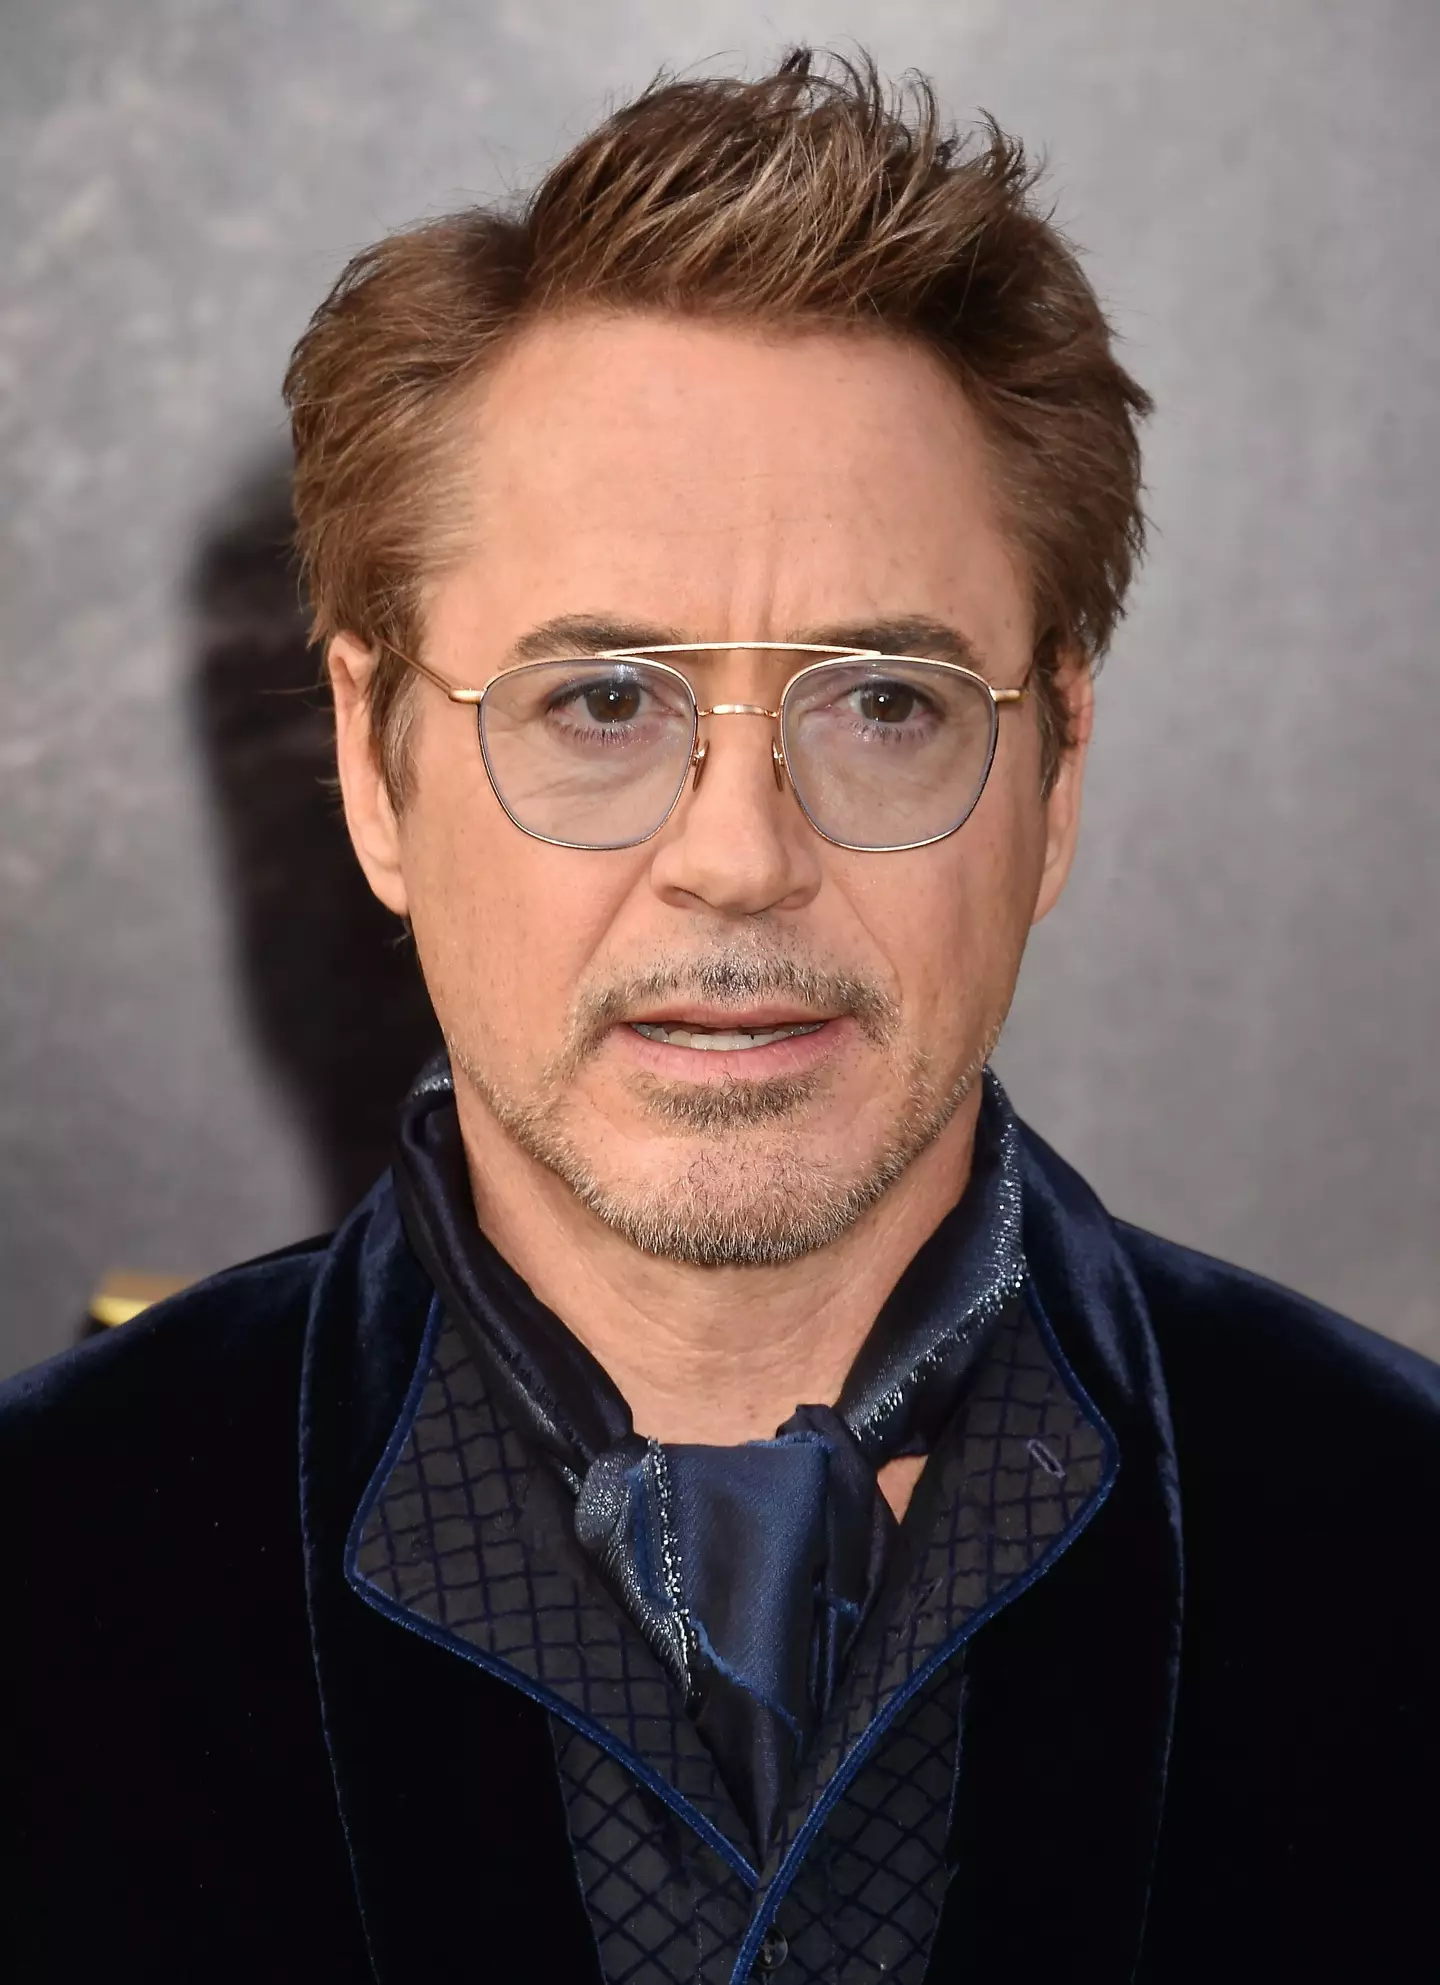 Downey Jr was cast in Jamie Foxx's film, which in the end wasn't released.